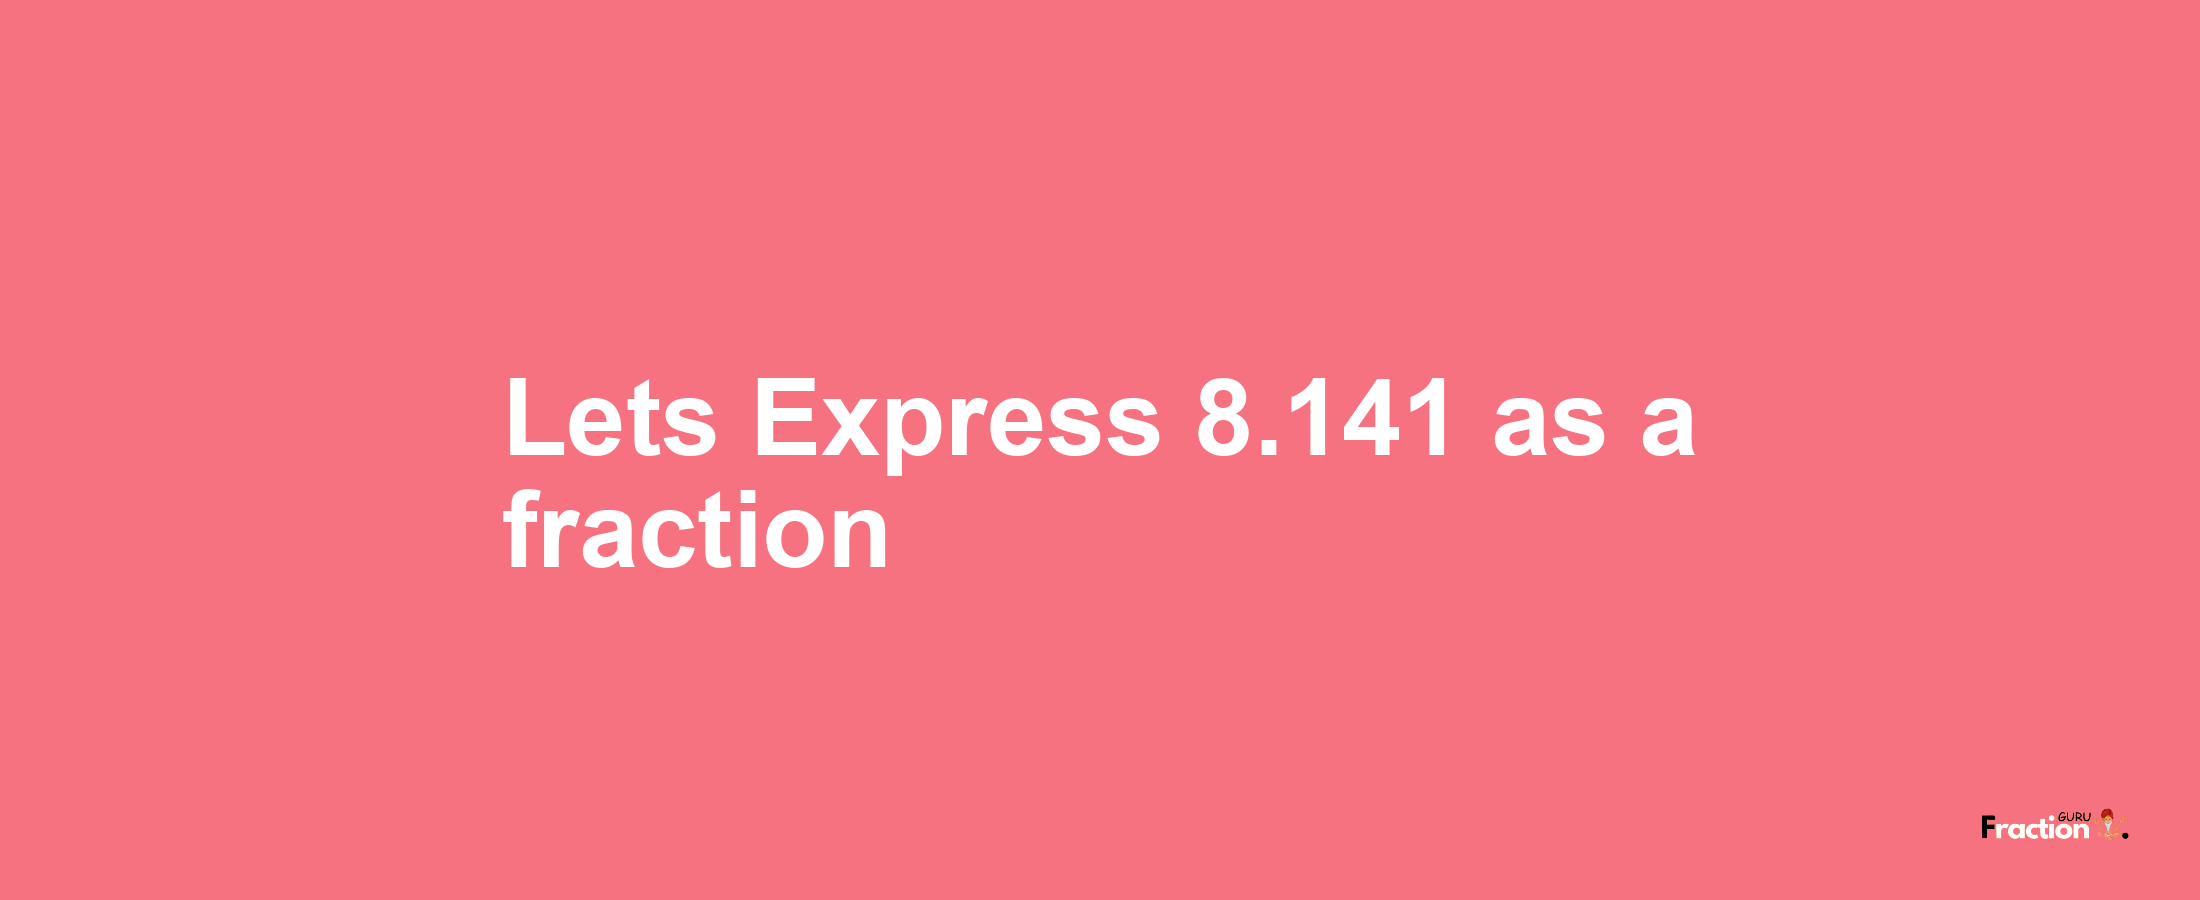 Lets Express 8.141 as afraction